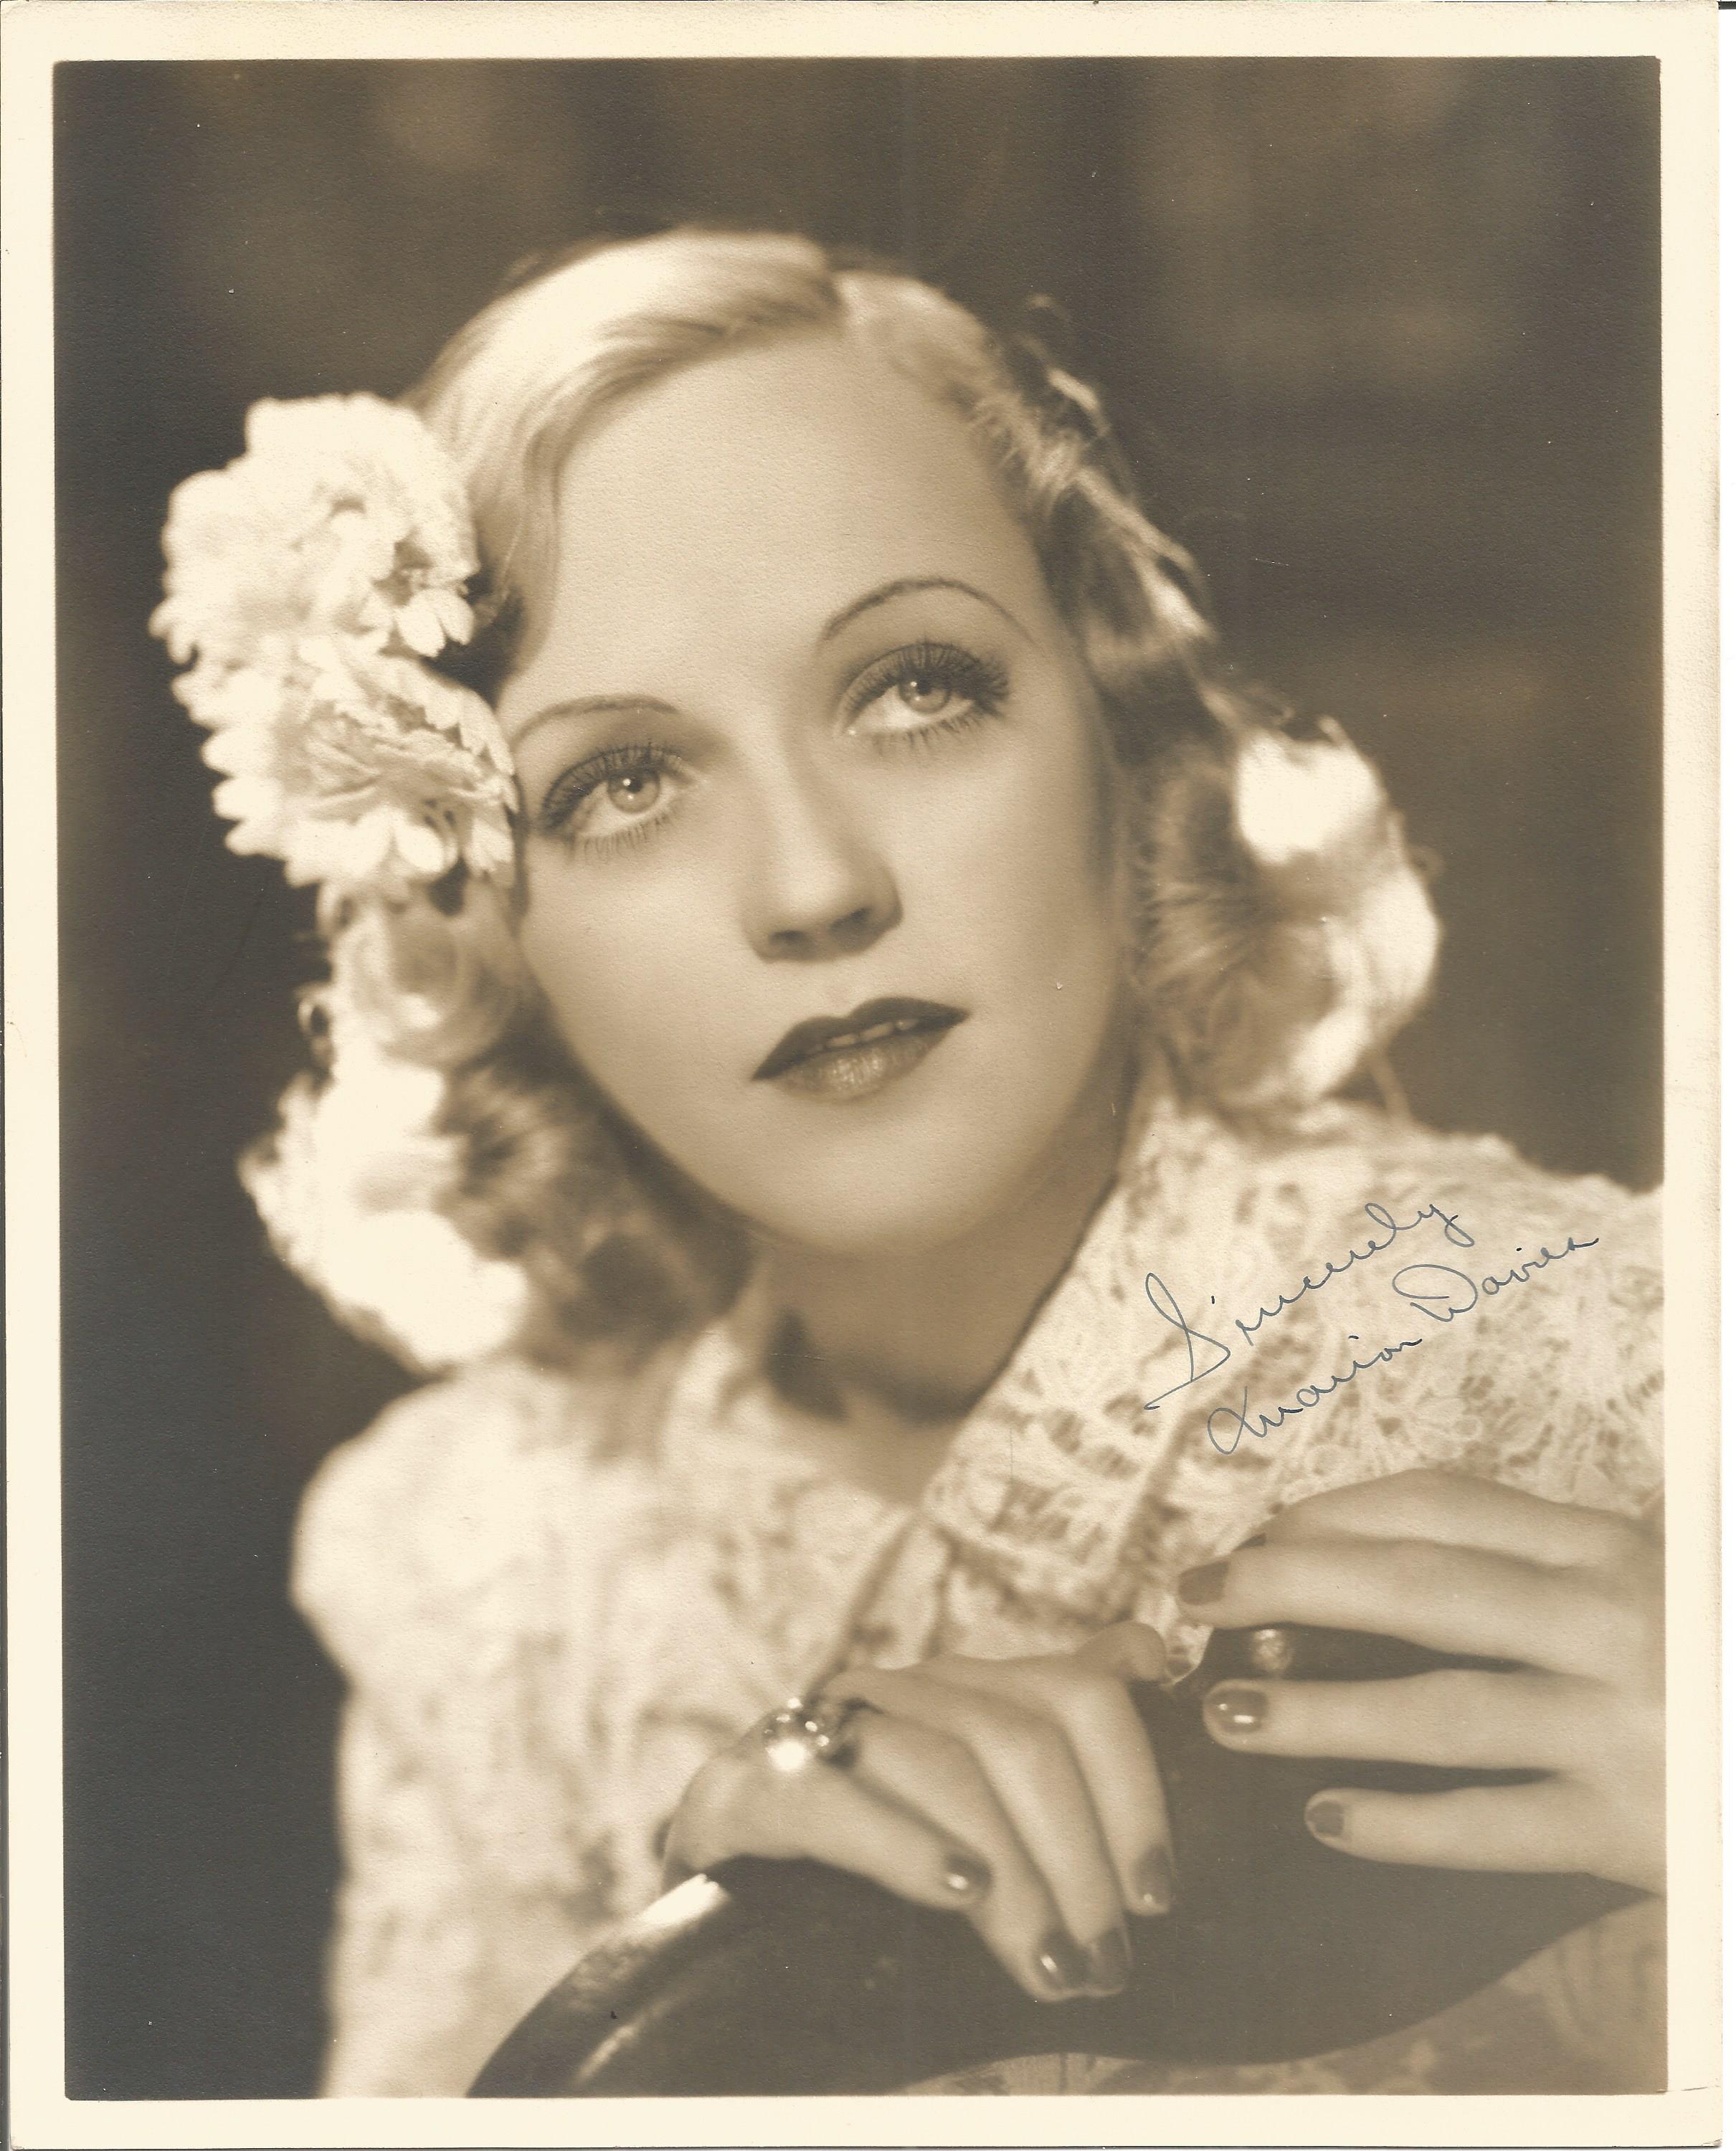 Marion Davies signed vintage 10x8 photo. American actress. All autographs come with a Certificate of